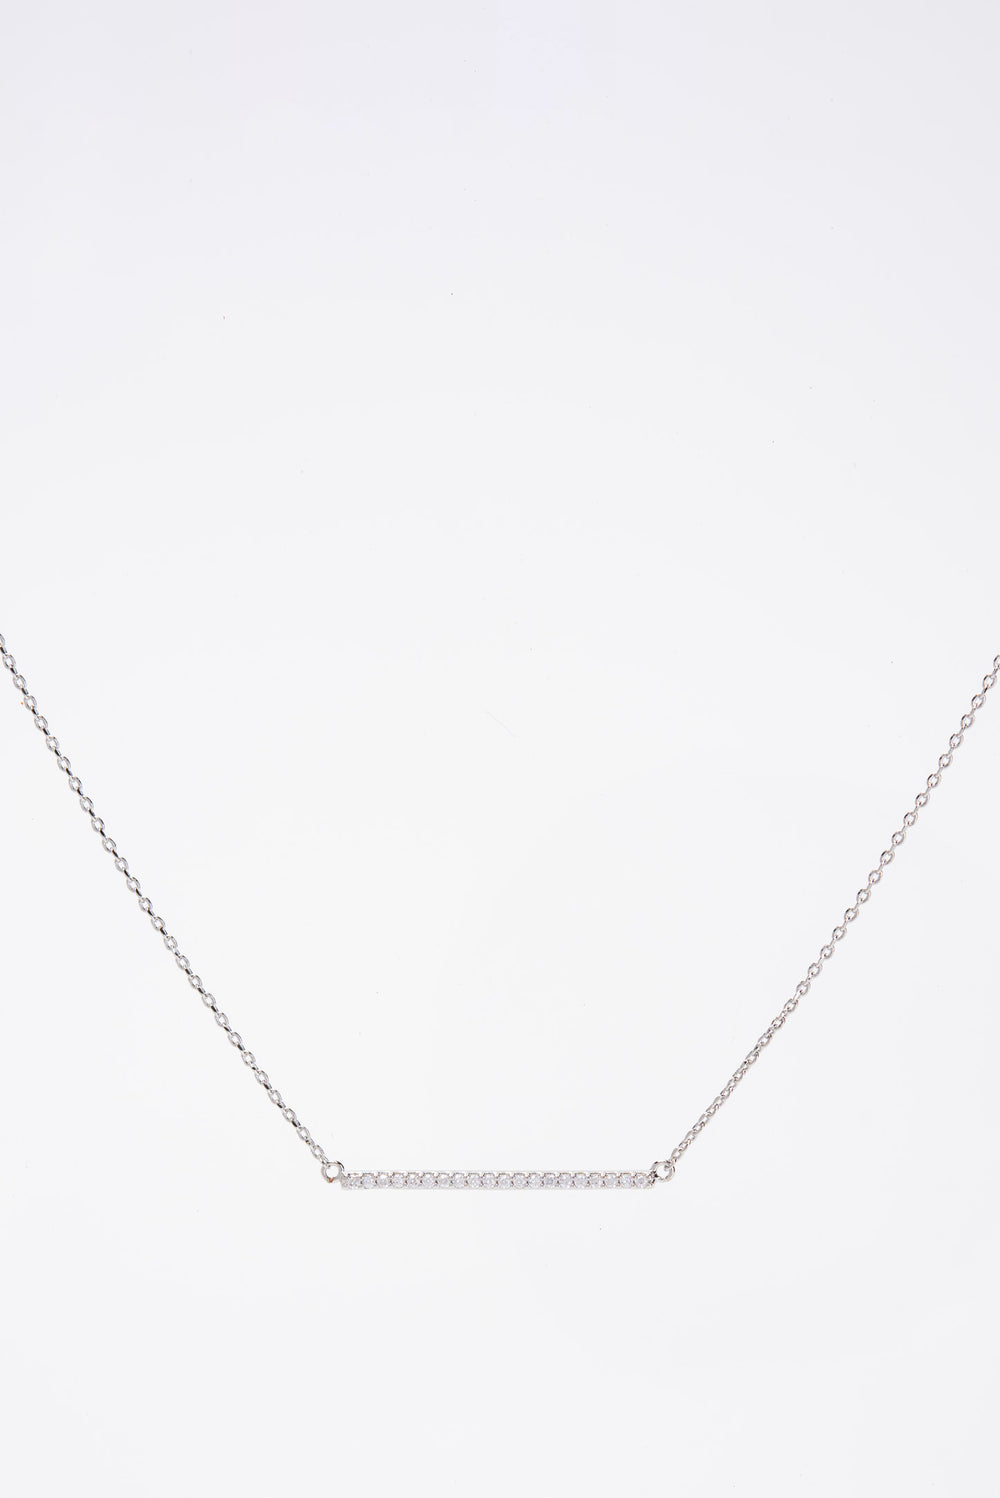 Lilly Gold Dipped CZ Bar Necklace - Silver